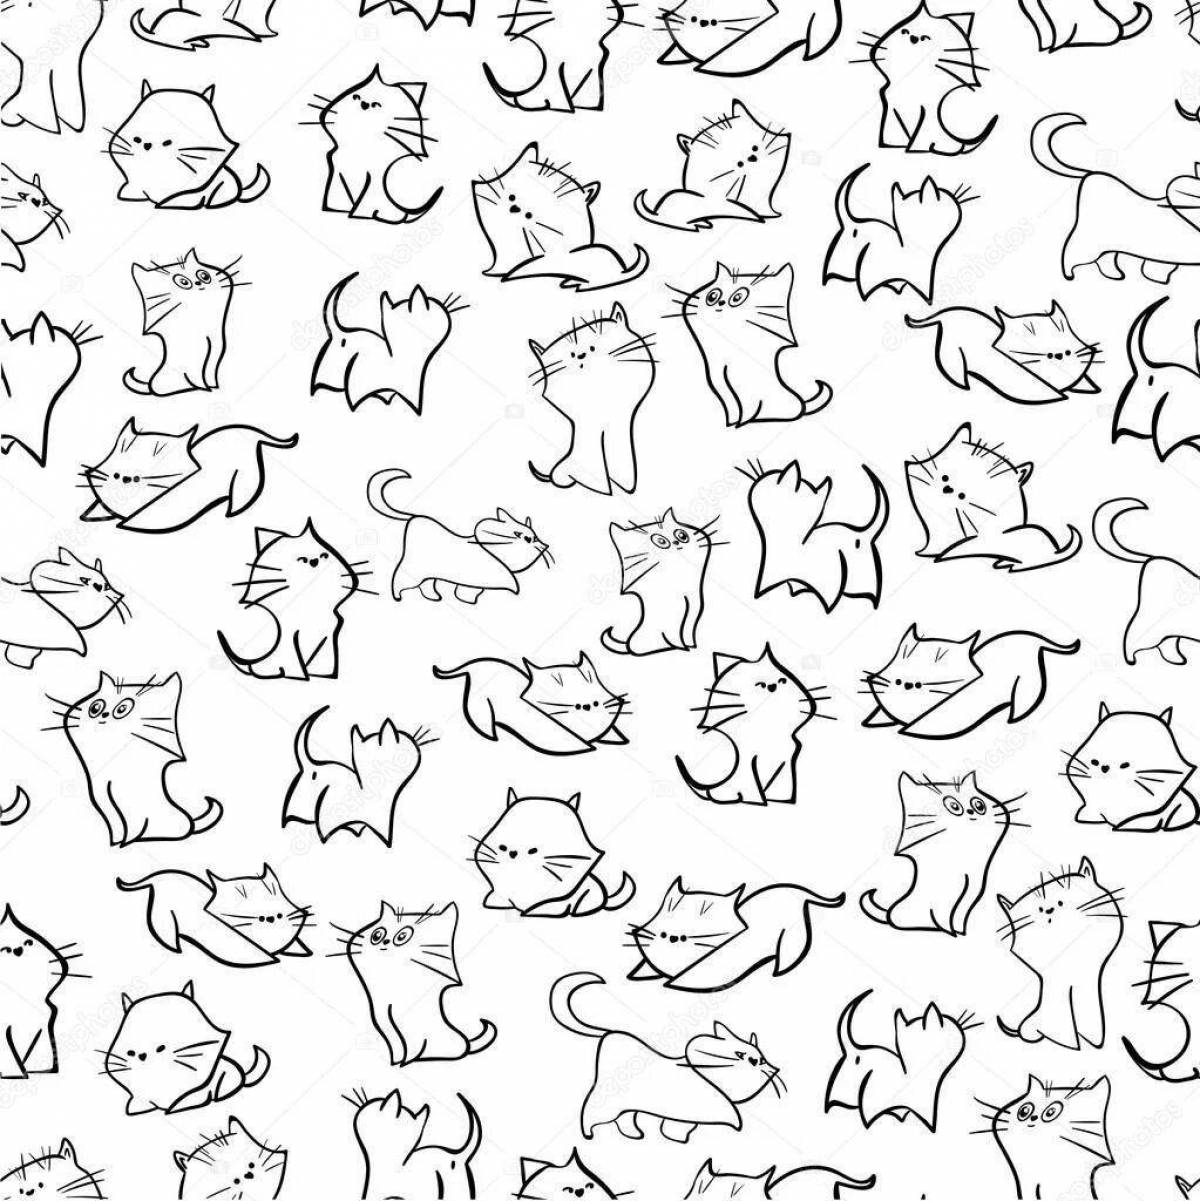 Great coloring book with lots of cats